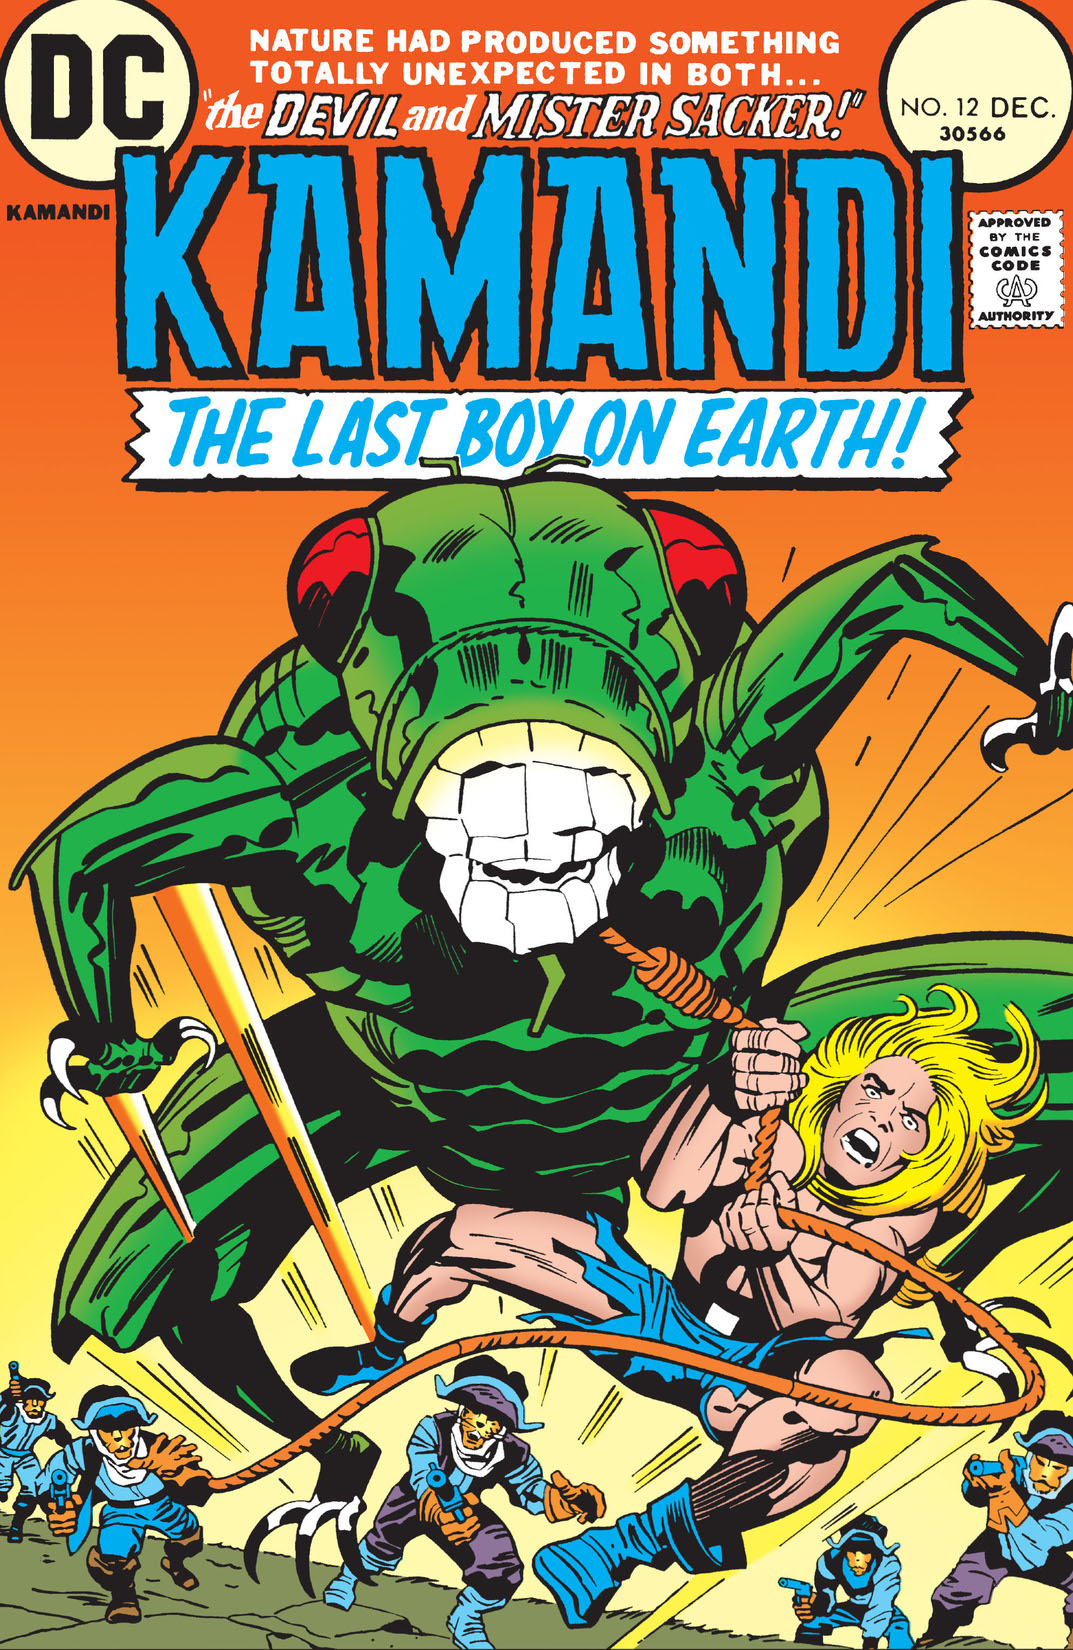 Kamandi: The Last Boy on Earth #12 preview images